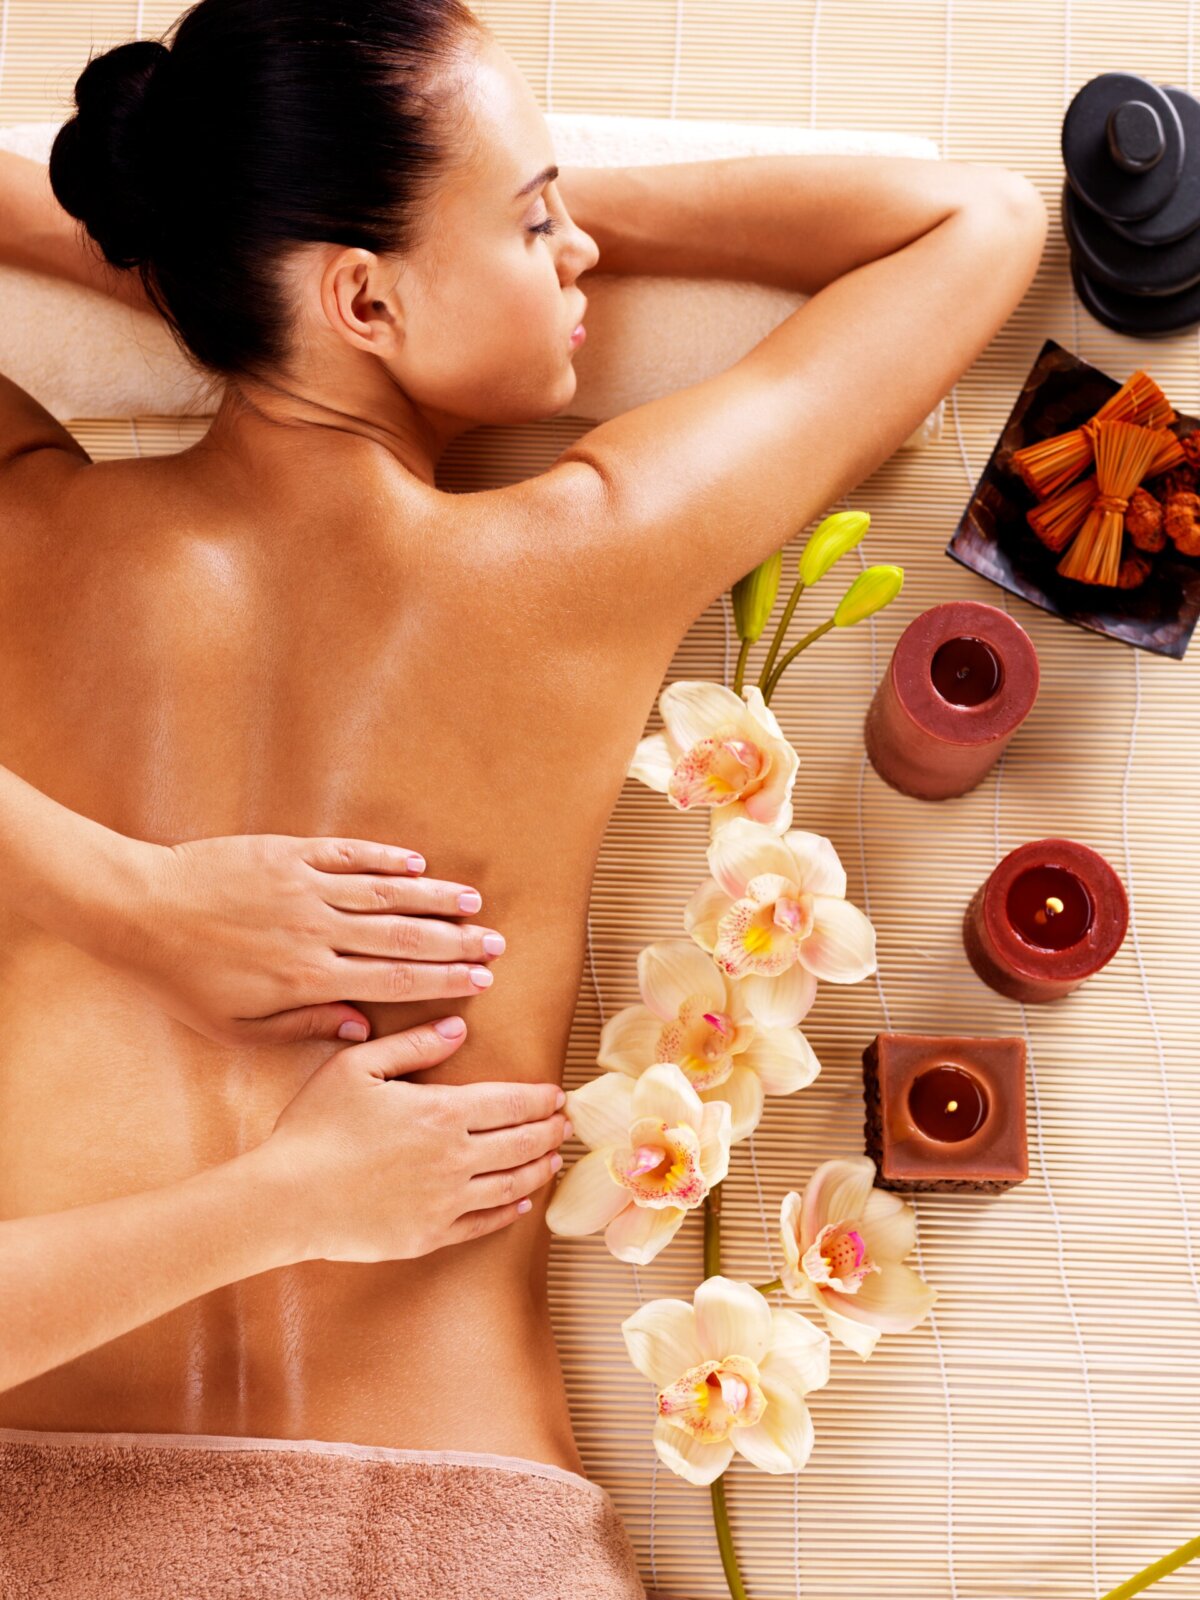 Which Massage is best for You?